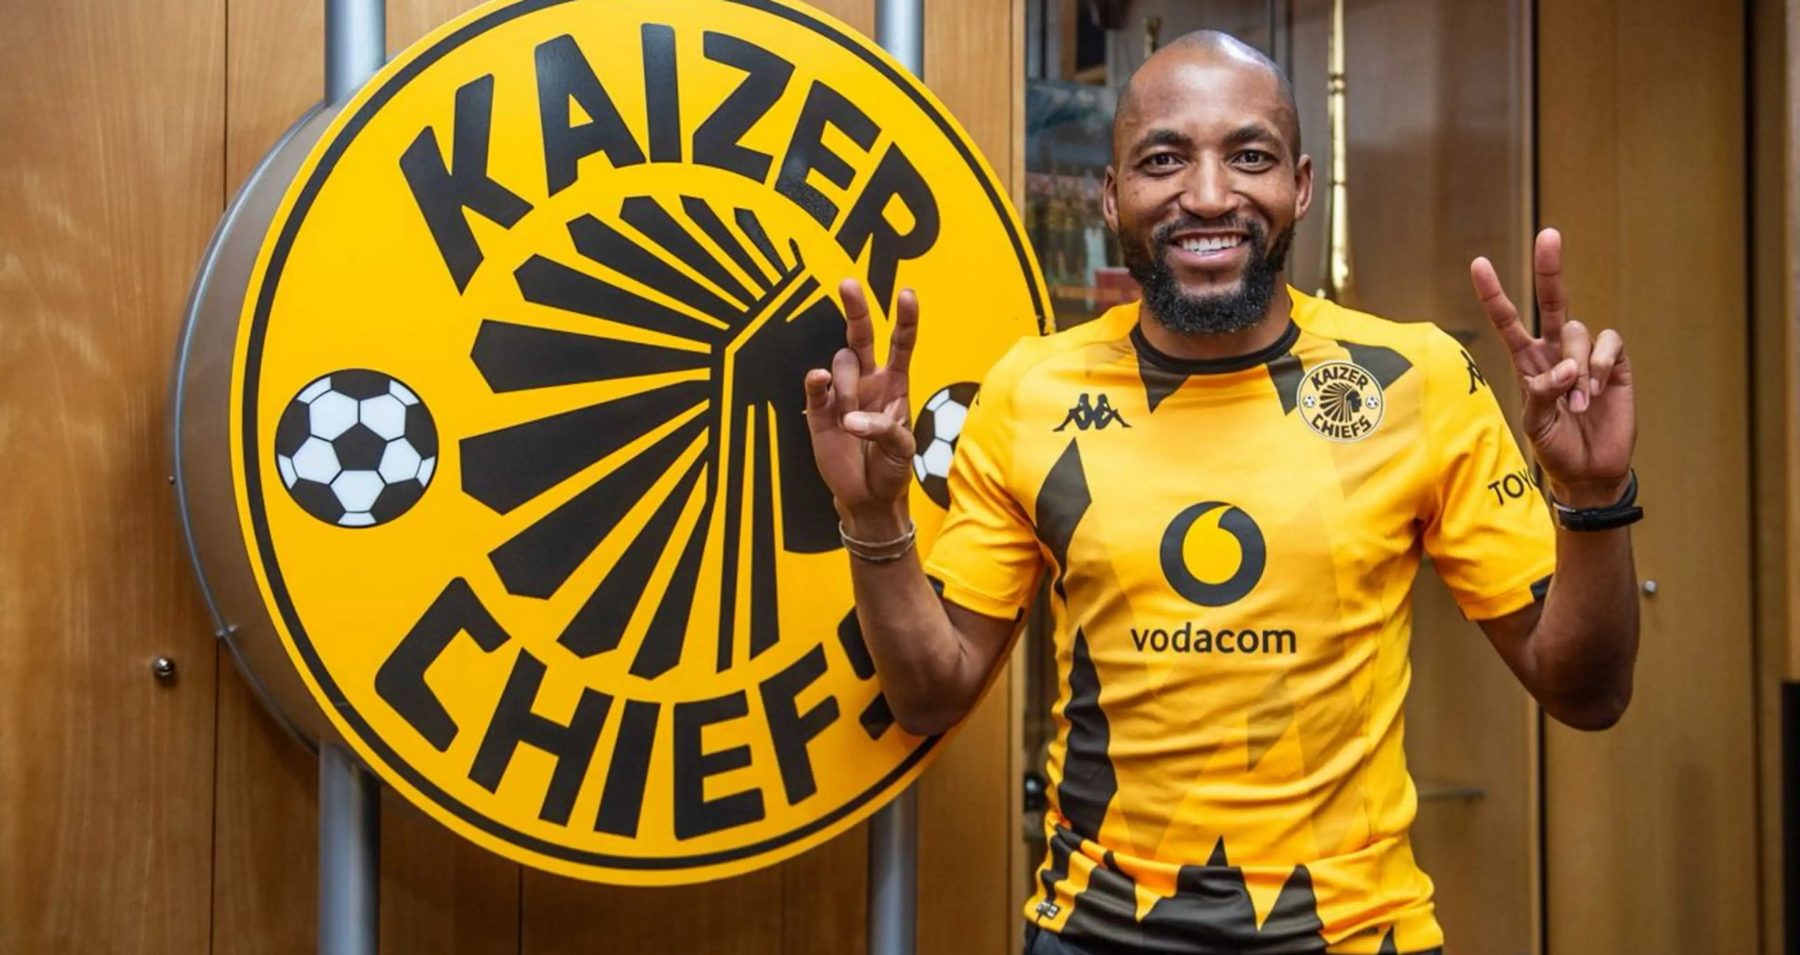 When Mthethwa is likely to make his Kaizer Chiefs debut